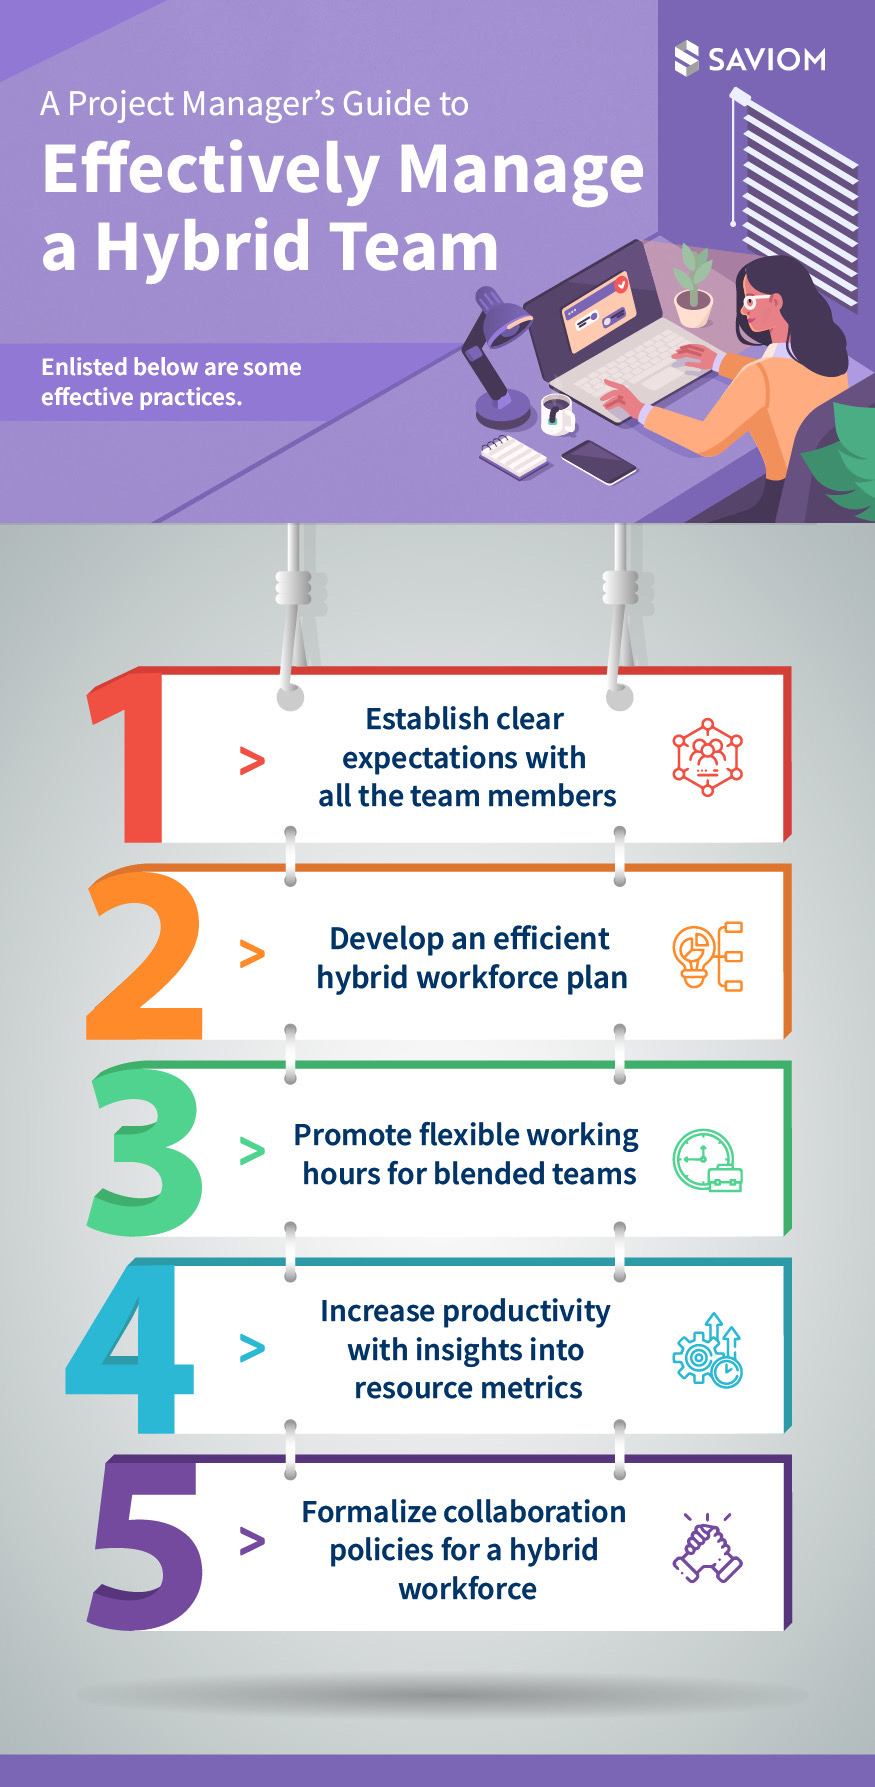 A Project Manager’s Guide to Effectively Manage a Hybrid Team